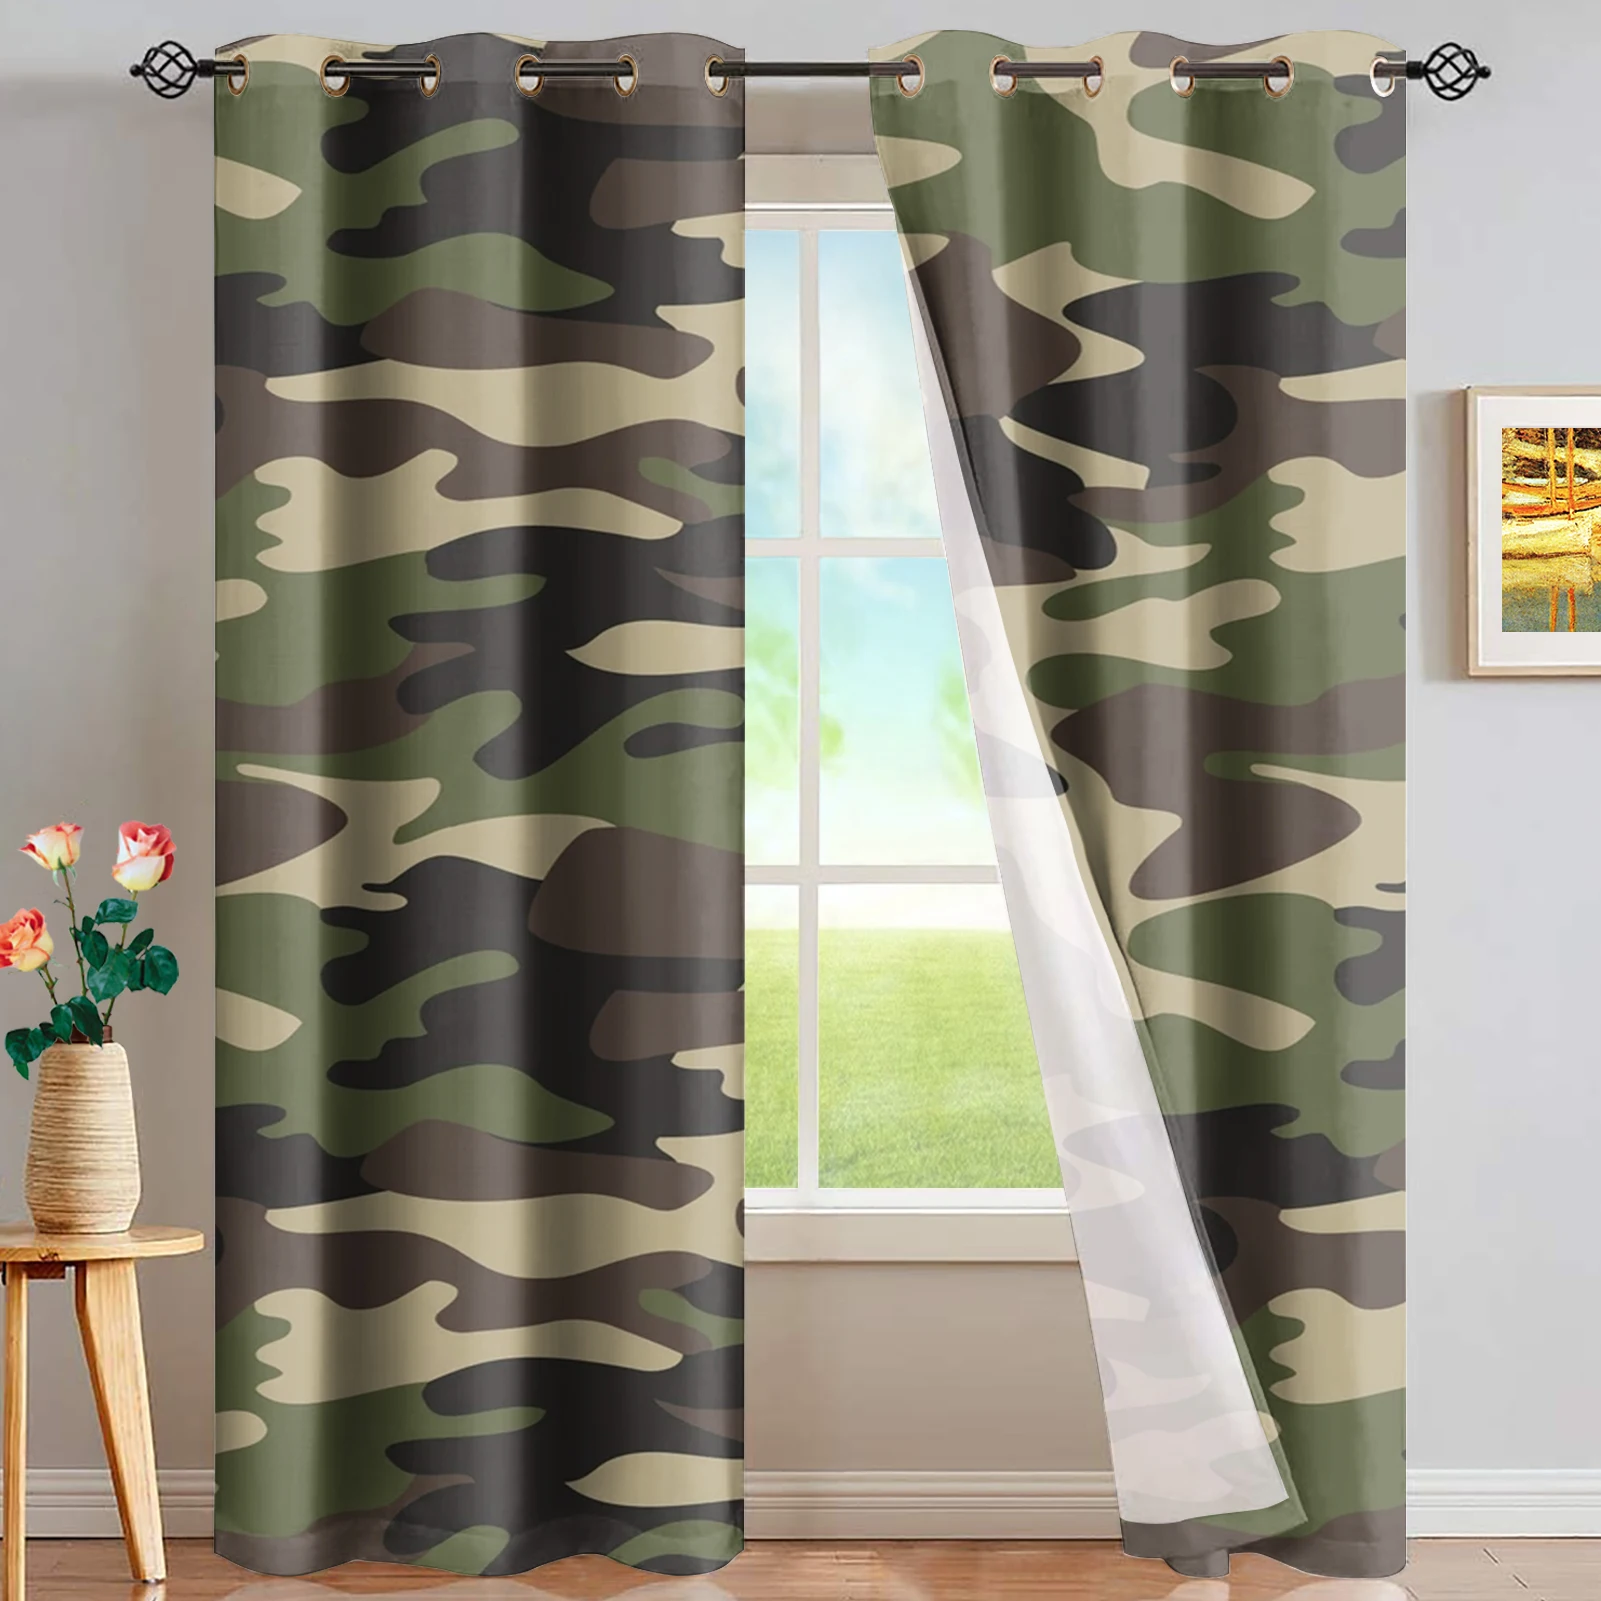 

Camouflage Window Curtain Blackout Blinds Curtains Drapes Kids Curtain Panels with Grommets Window Treatment Curtains and Drapes